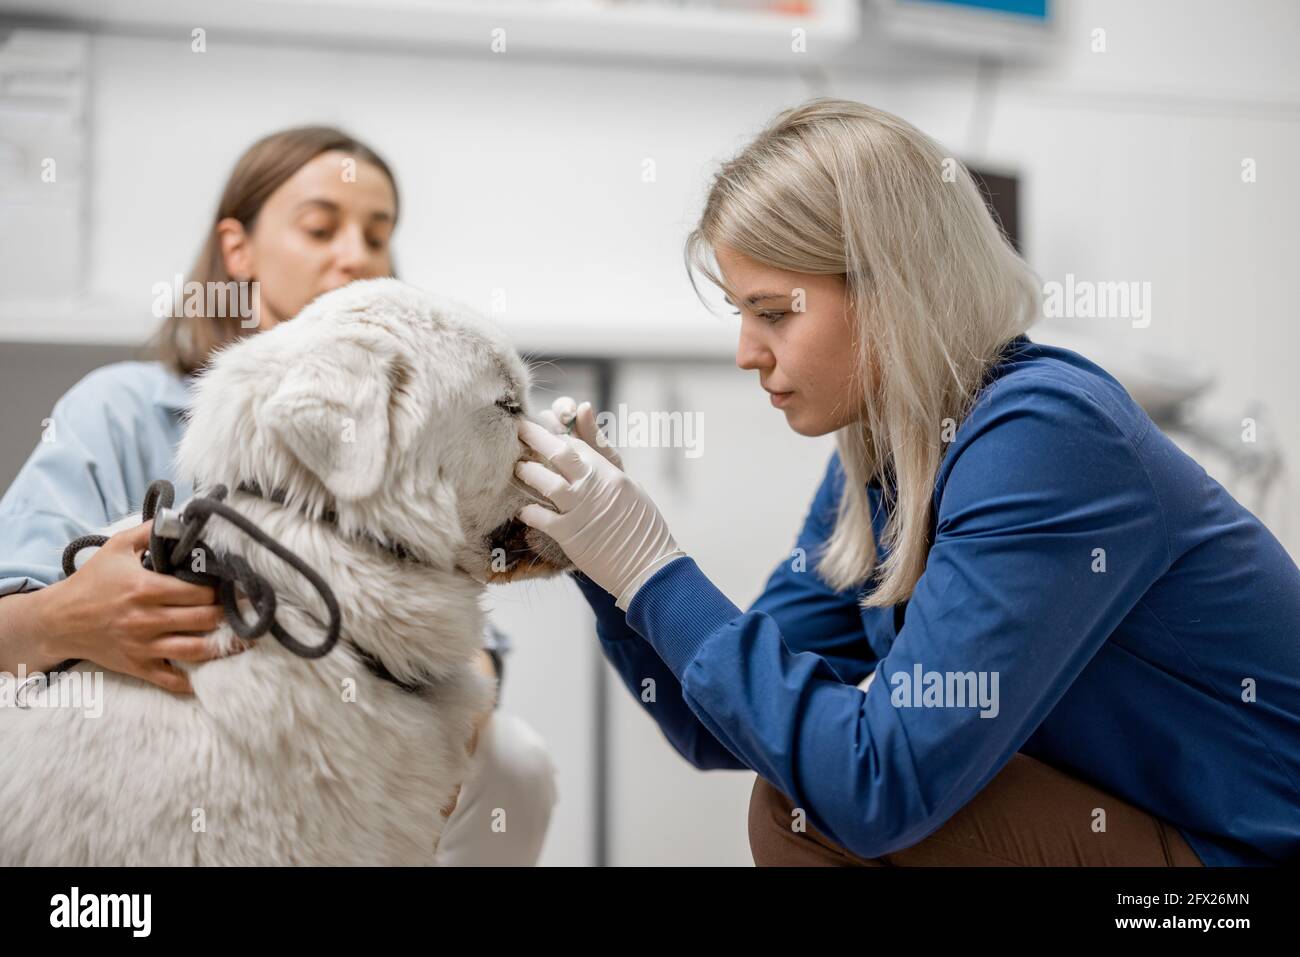 Female doctor removes the tick from the dog's snout in veterinarian clinic. Pet care. Stock Photo